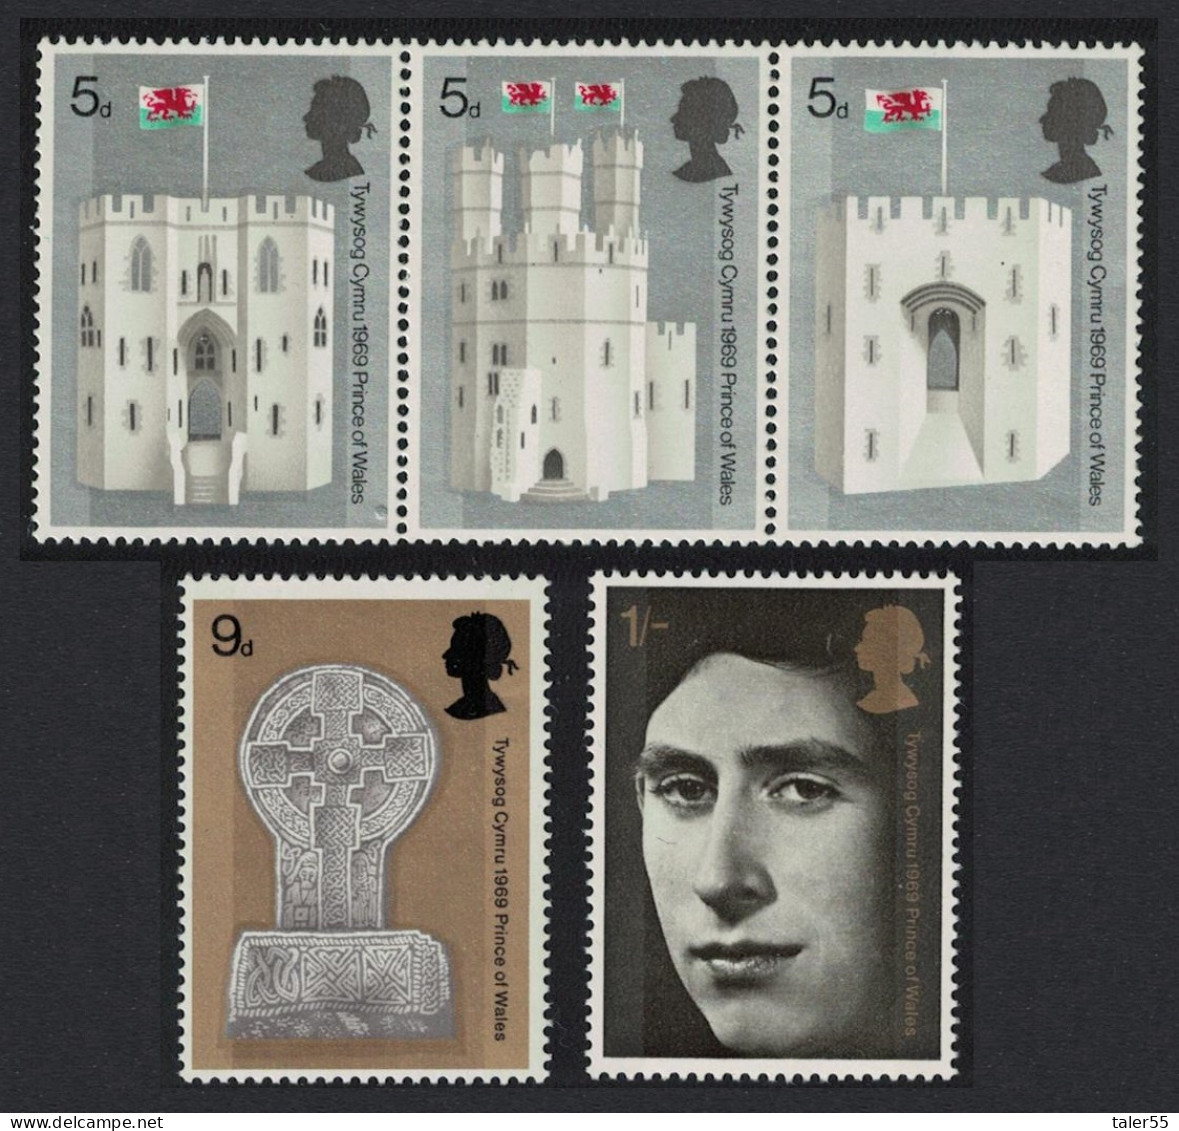 Great Britain Investiture Of The Prince Of Wales 5v 1969 MNH SG#802-806 Sc#597-599 - Nuovi